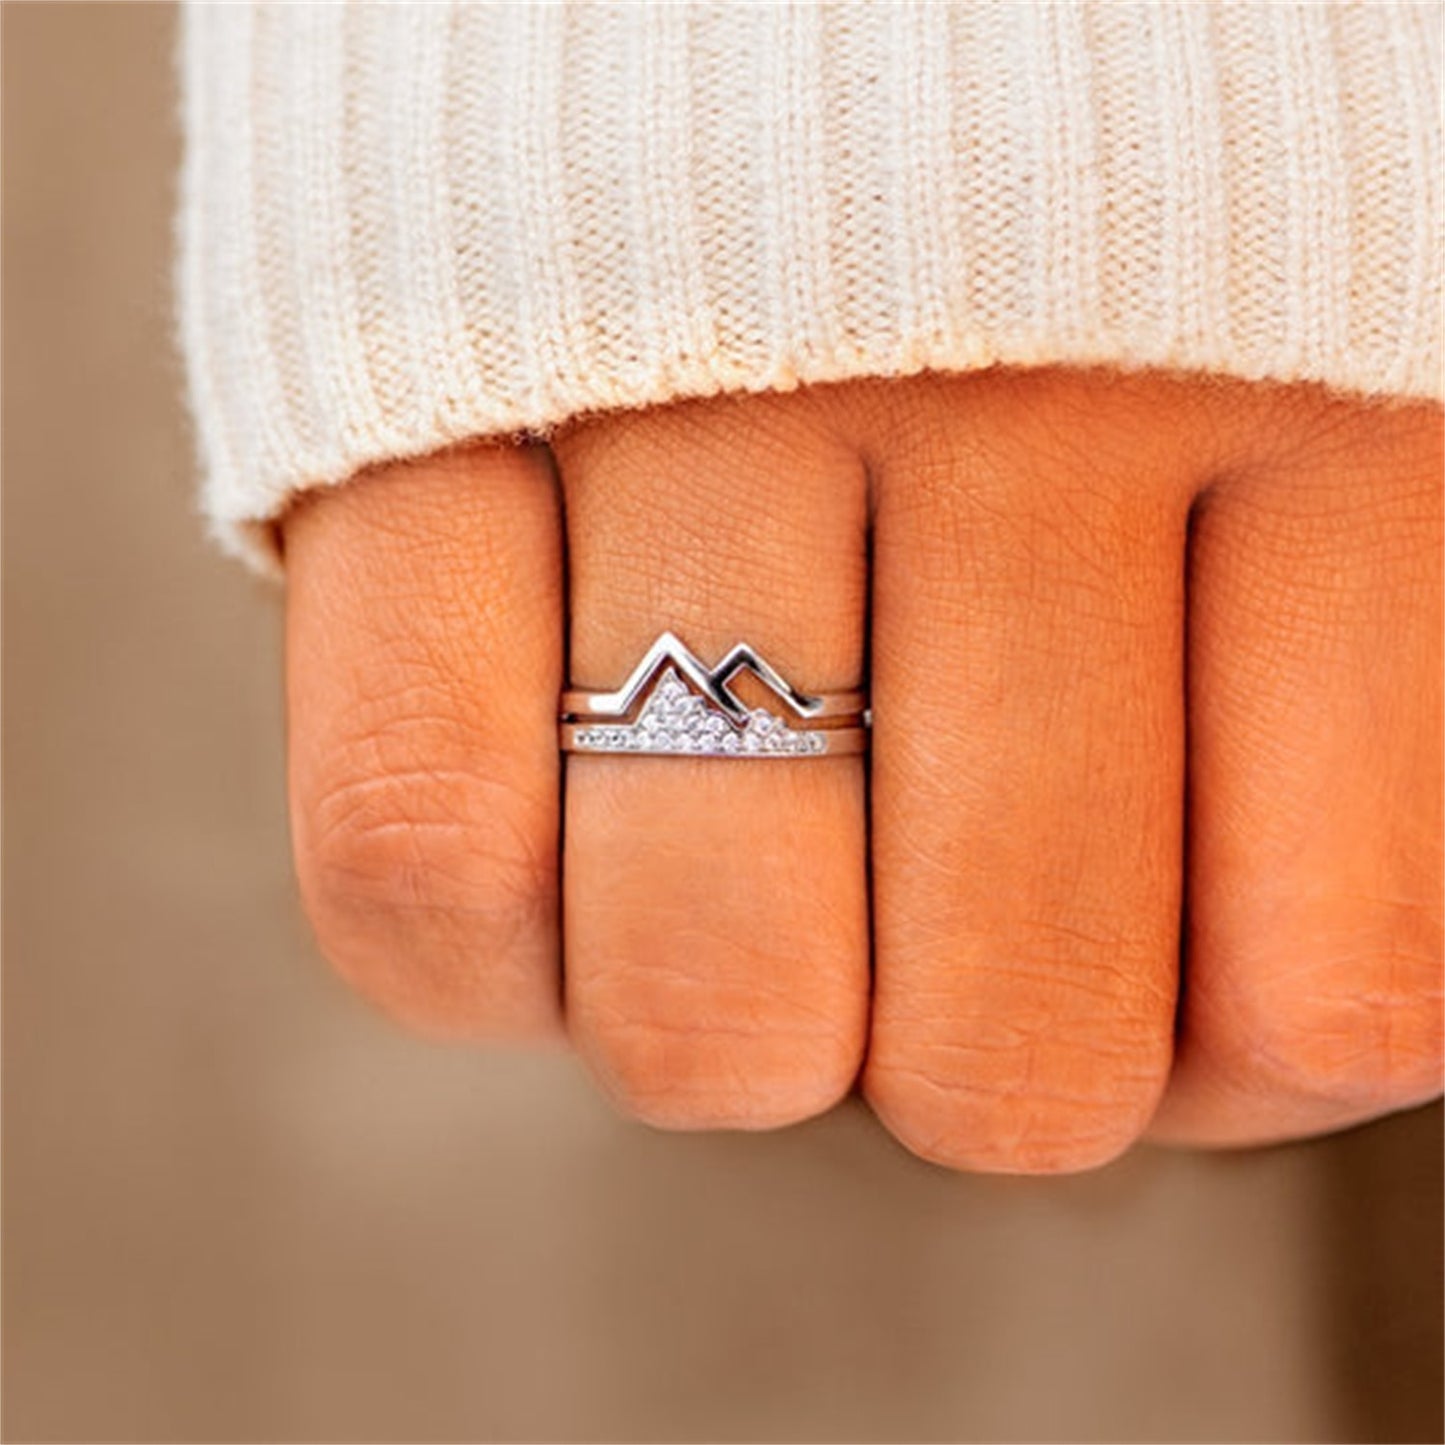 Daughter Faith Moves Mountains Sterling Silver Ring